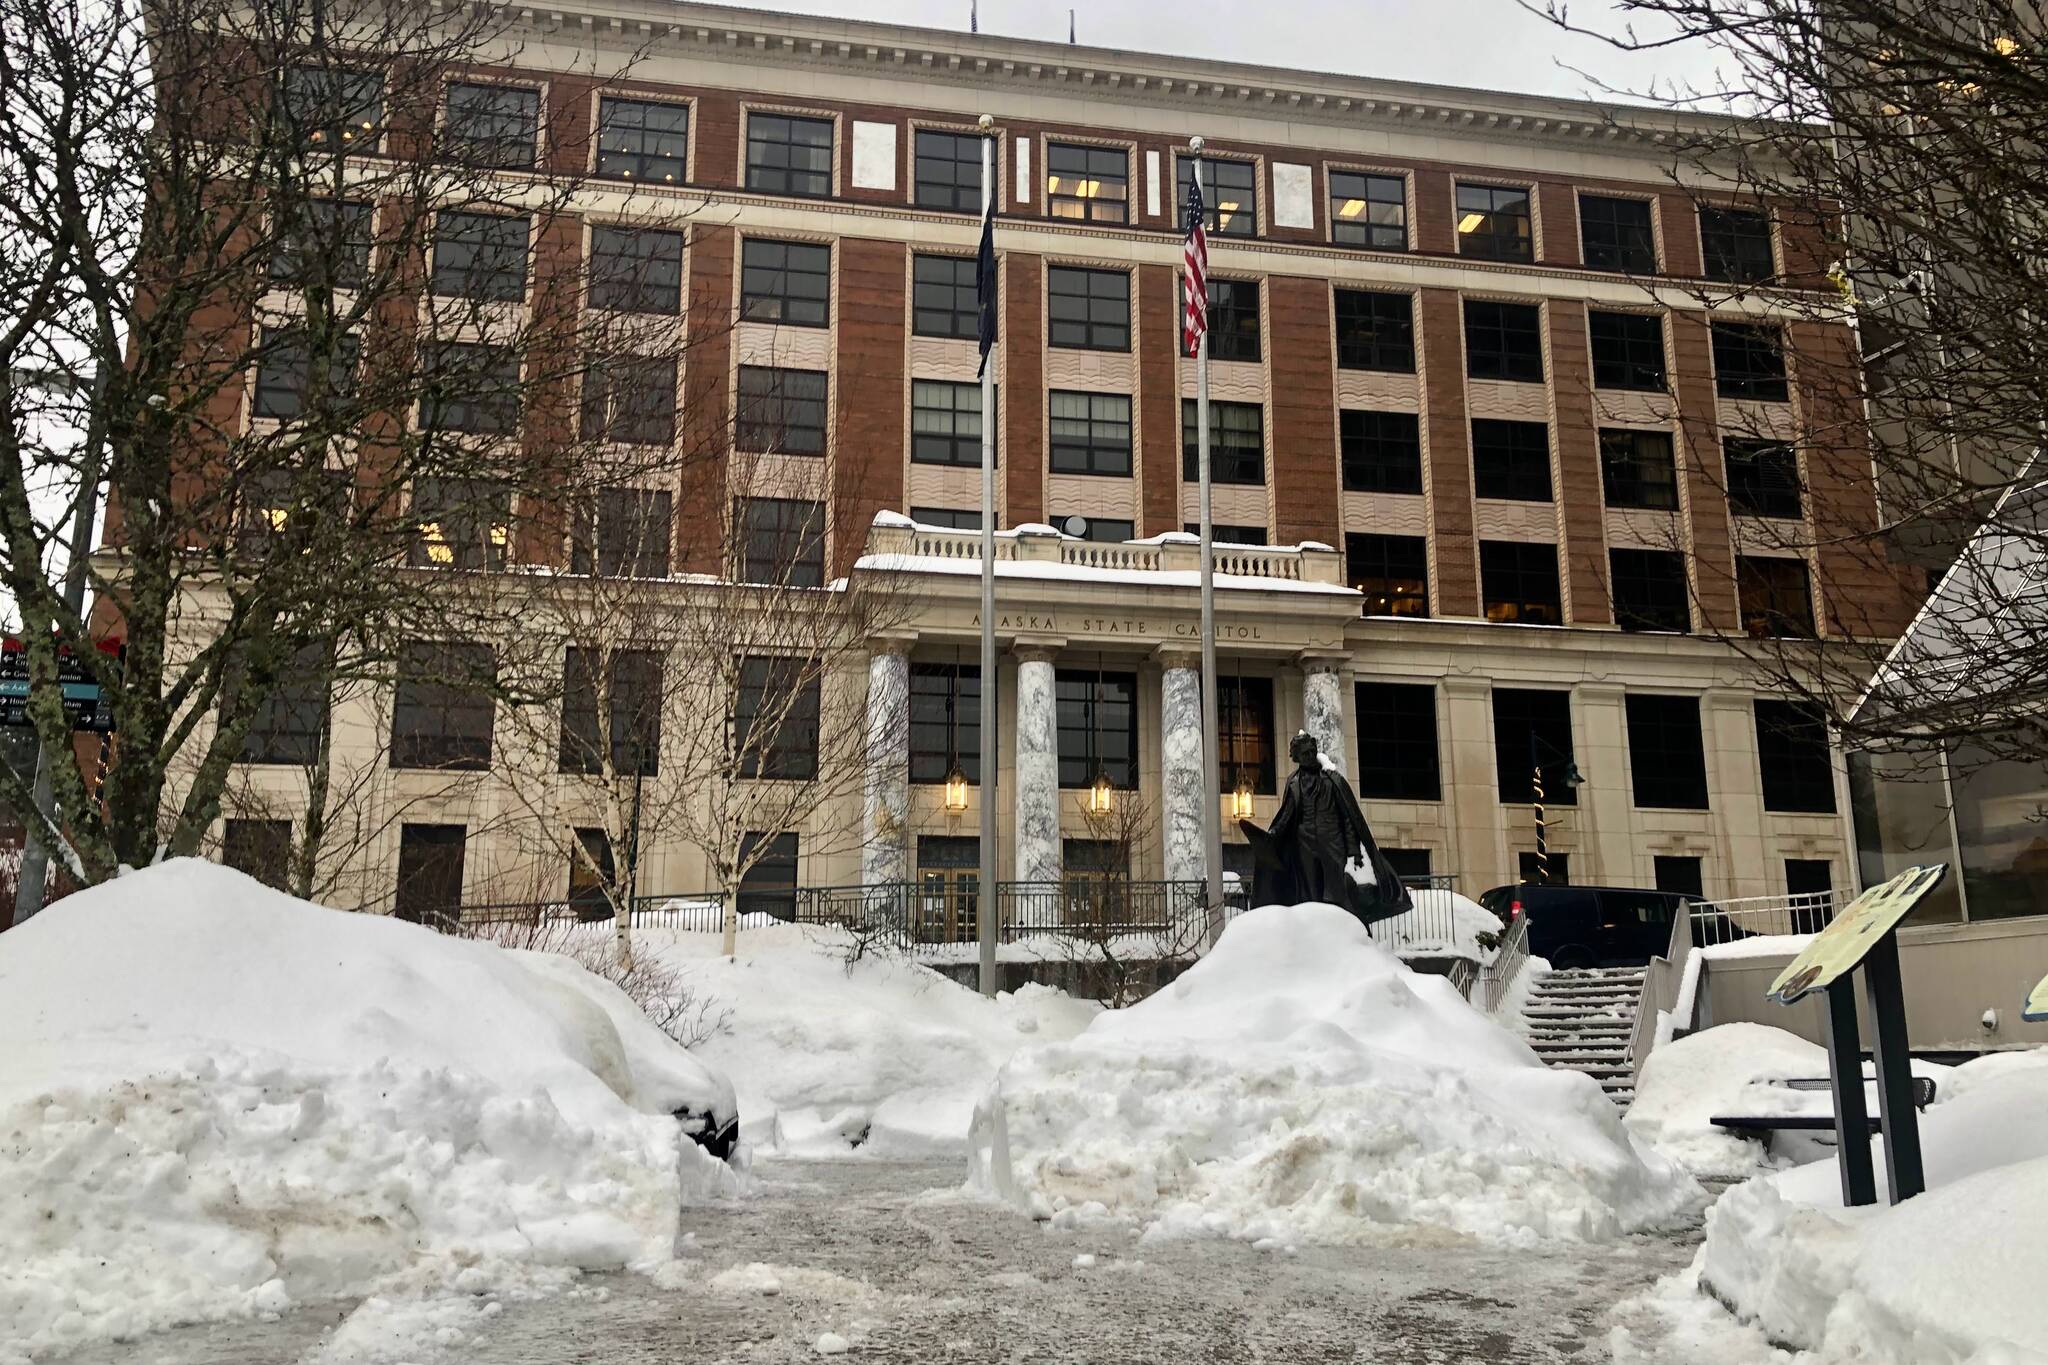 Lawmakers will return next week to the Alaska State Capitol building, seen here on Monday, Jan. 10, 2022, for the next session of the Alaska State Legislature, but local leaders were cautious about what could be accomplished in an election year. (Peter Segall / Juneau Empire)